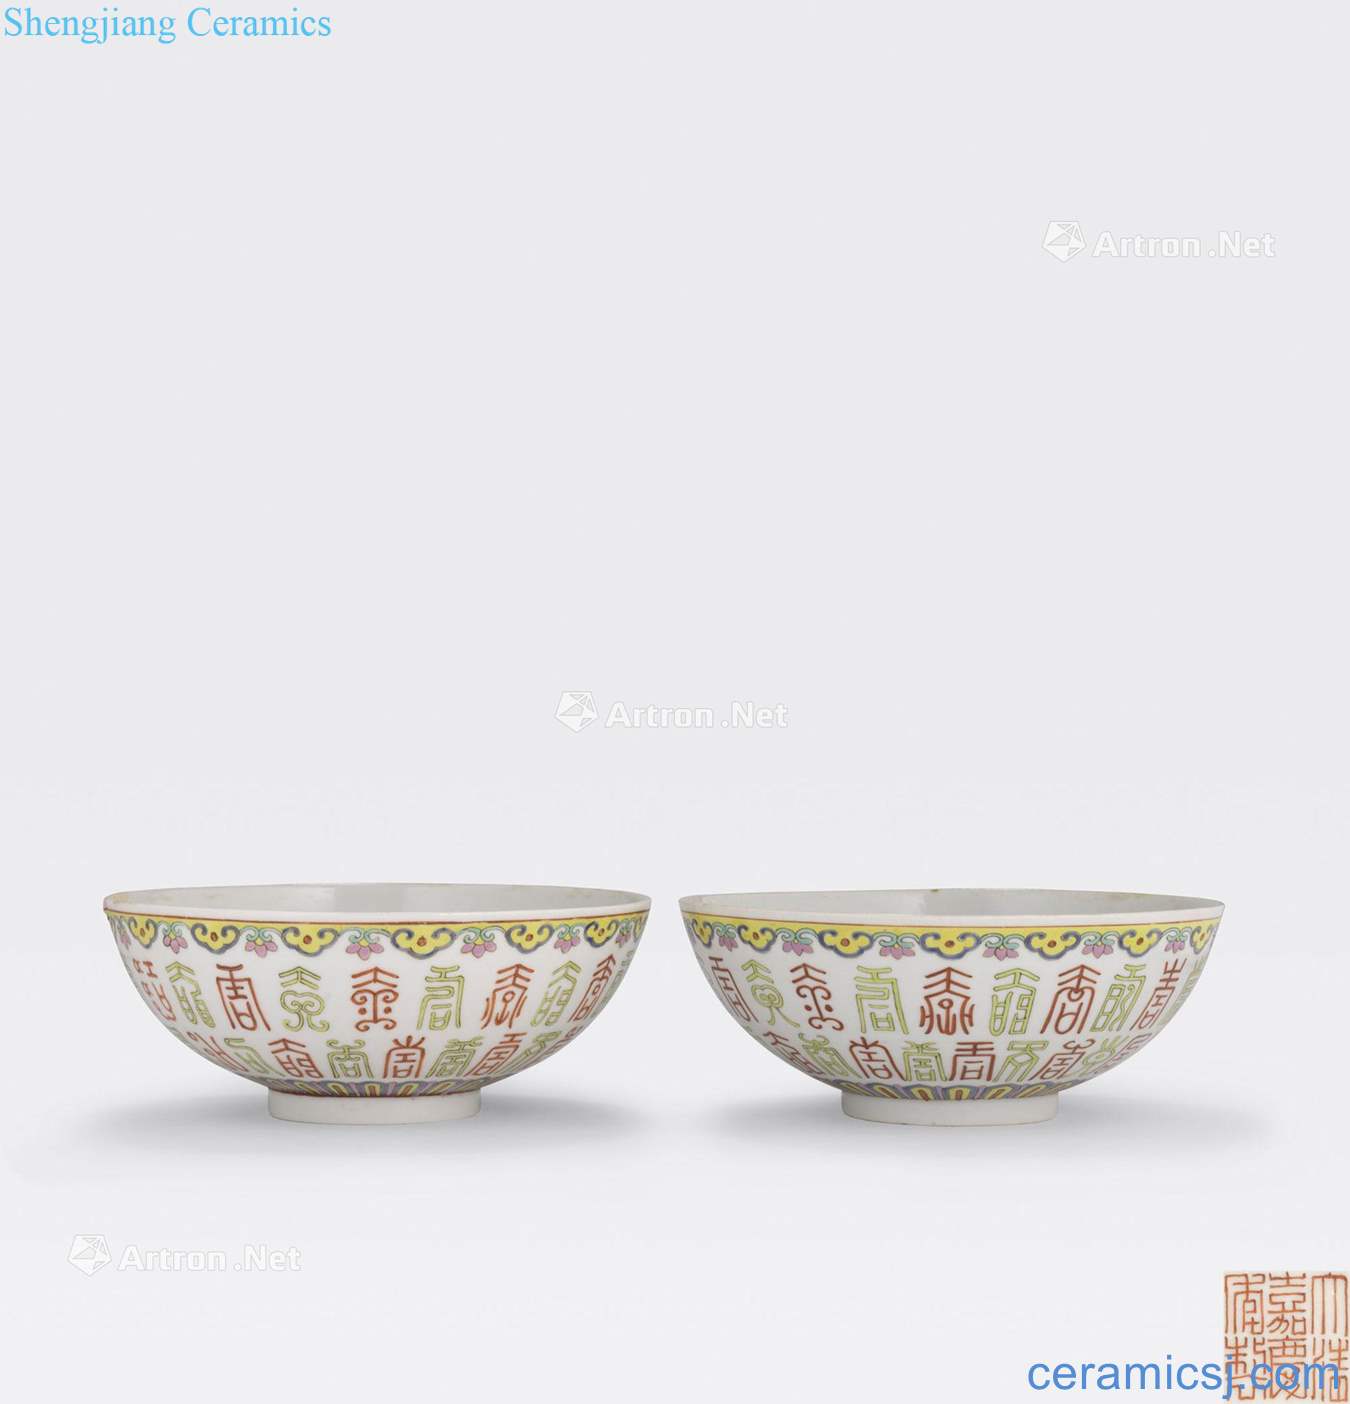 Jiaqing marks, newest the Qing/Republic period A PAIR OF FAMILLE ROSE ENAMELED SHOU CHARACTER BOWLS